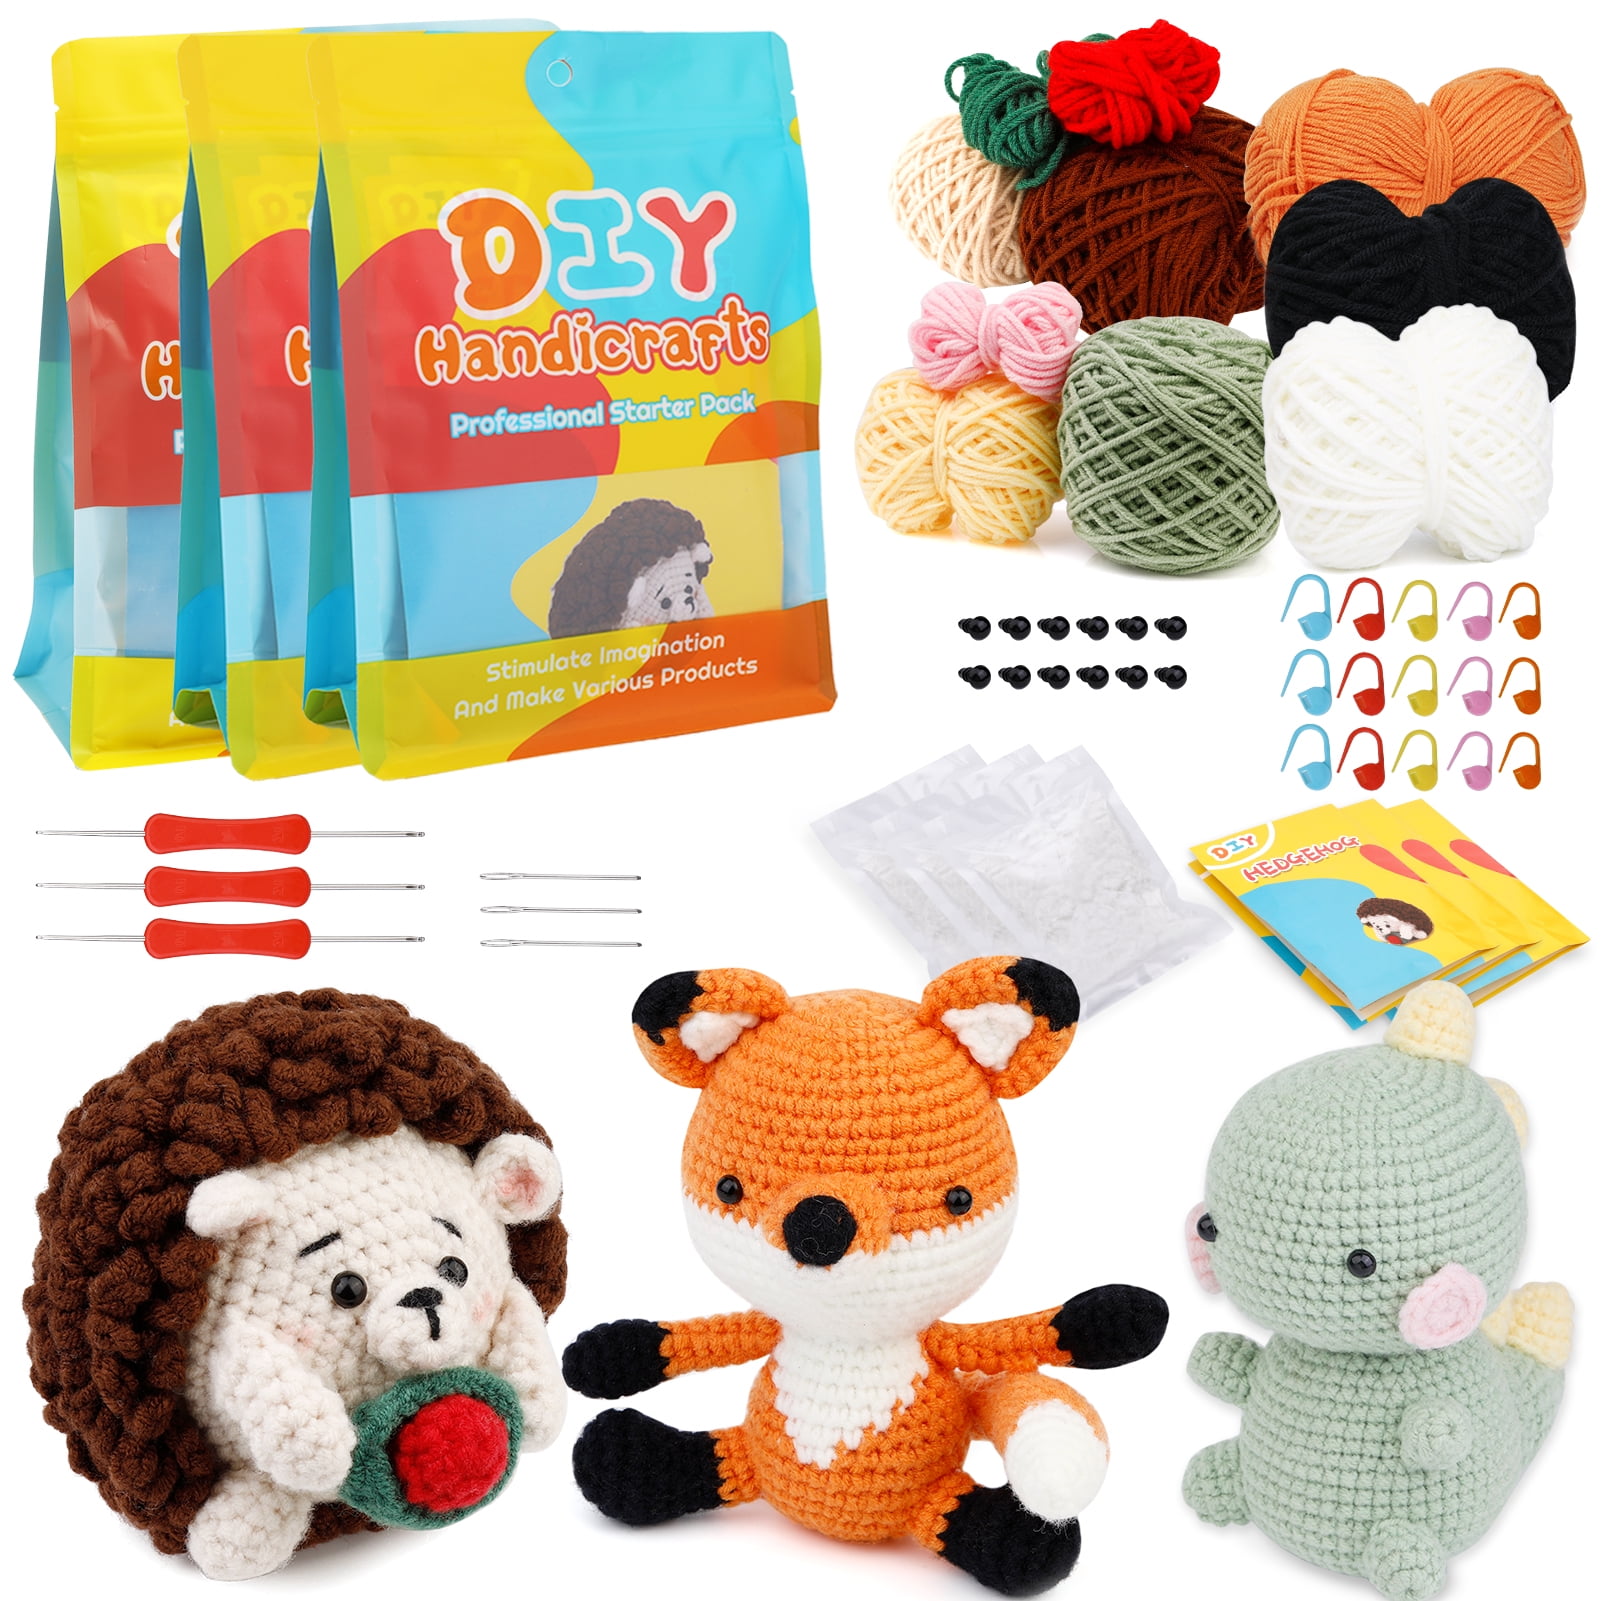  Ushomin 3PCS Crochet Kit for Beginners, 3 pcs DIY Crochet  Animal Kit for Adults Kids, Cute Knitting Kit with Step-by-Step Video  Tutorials (Bear+Chick+Cow)